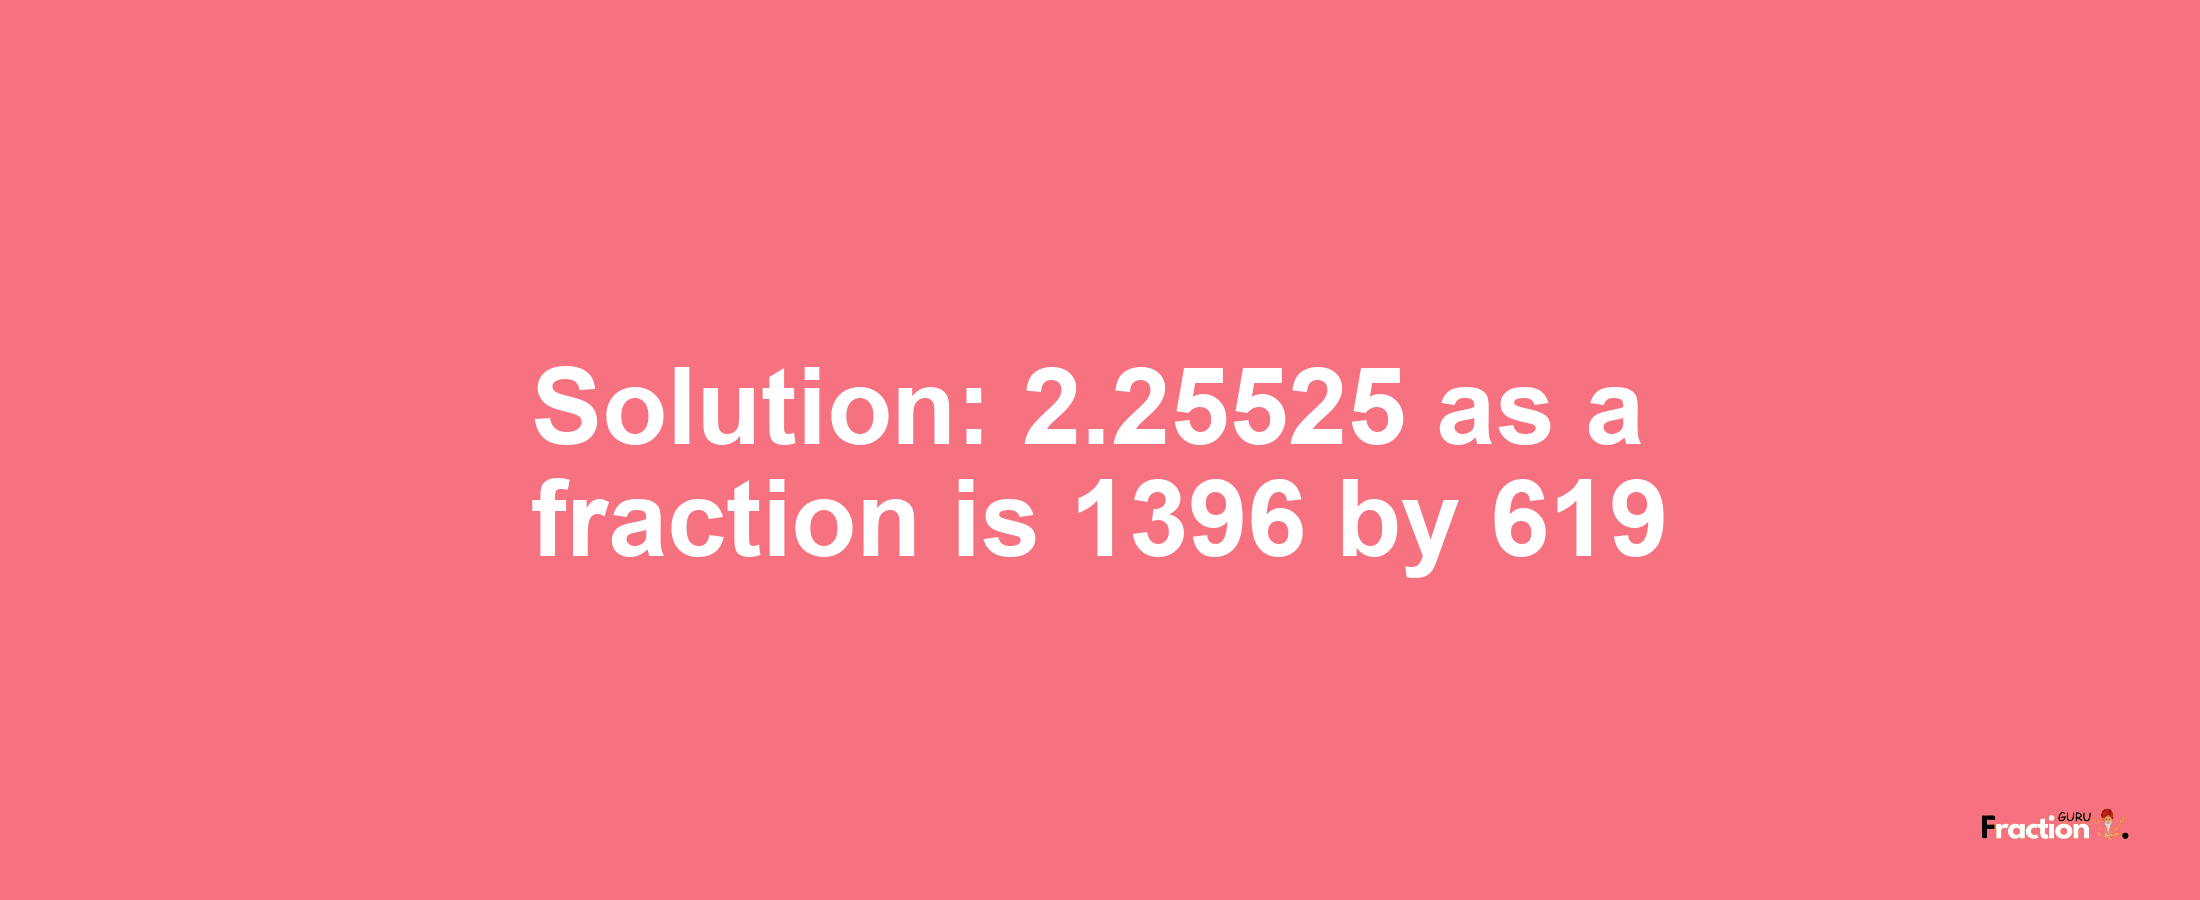 Solution:2.25525 as a fraction is 1396/619